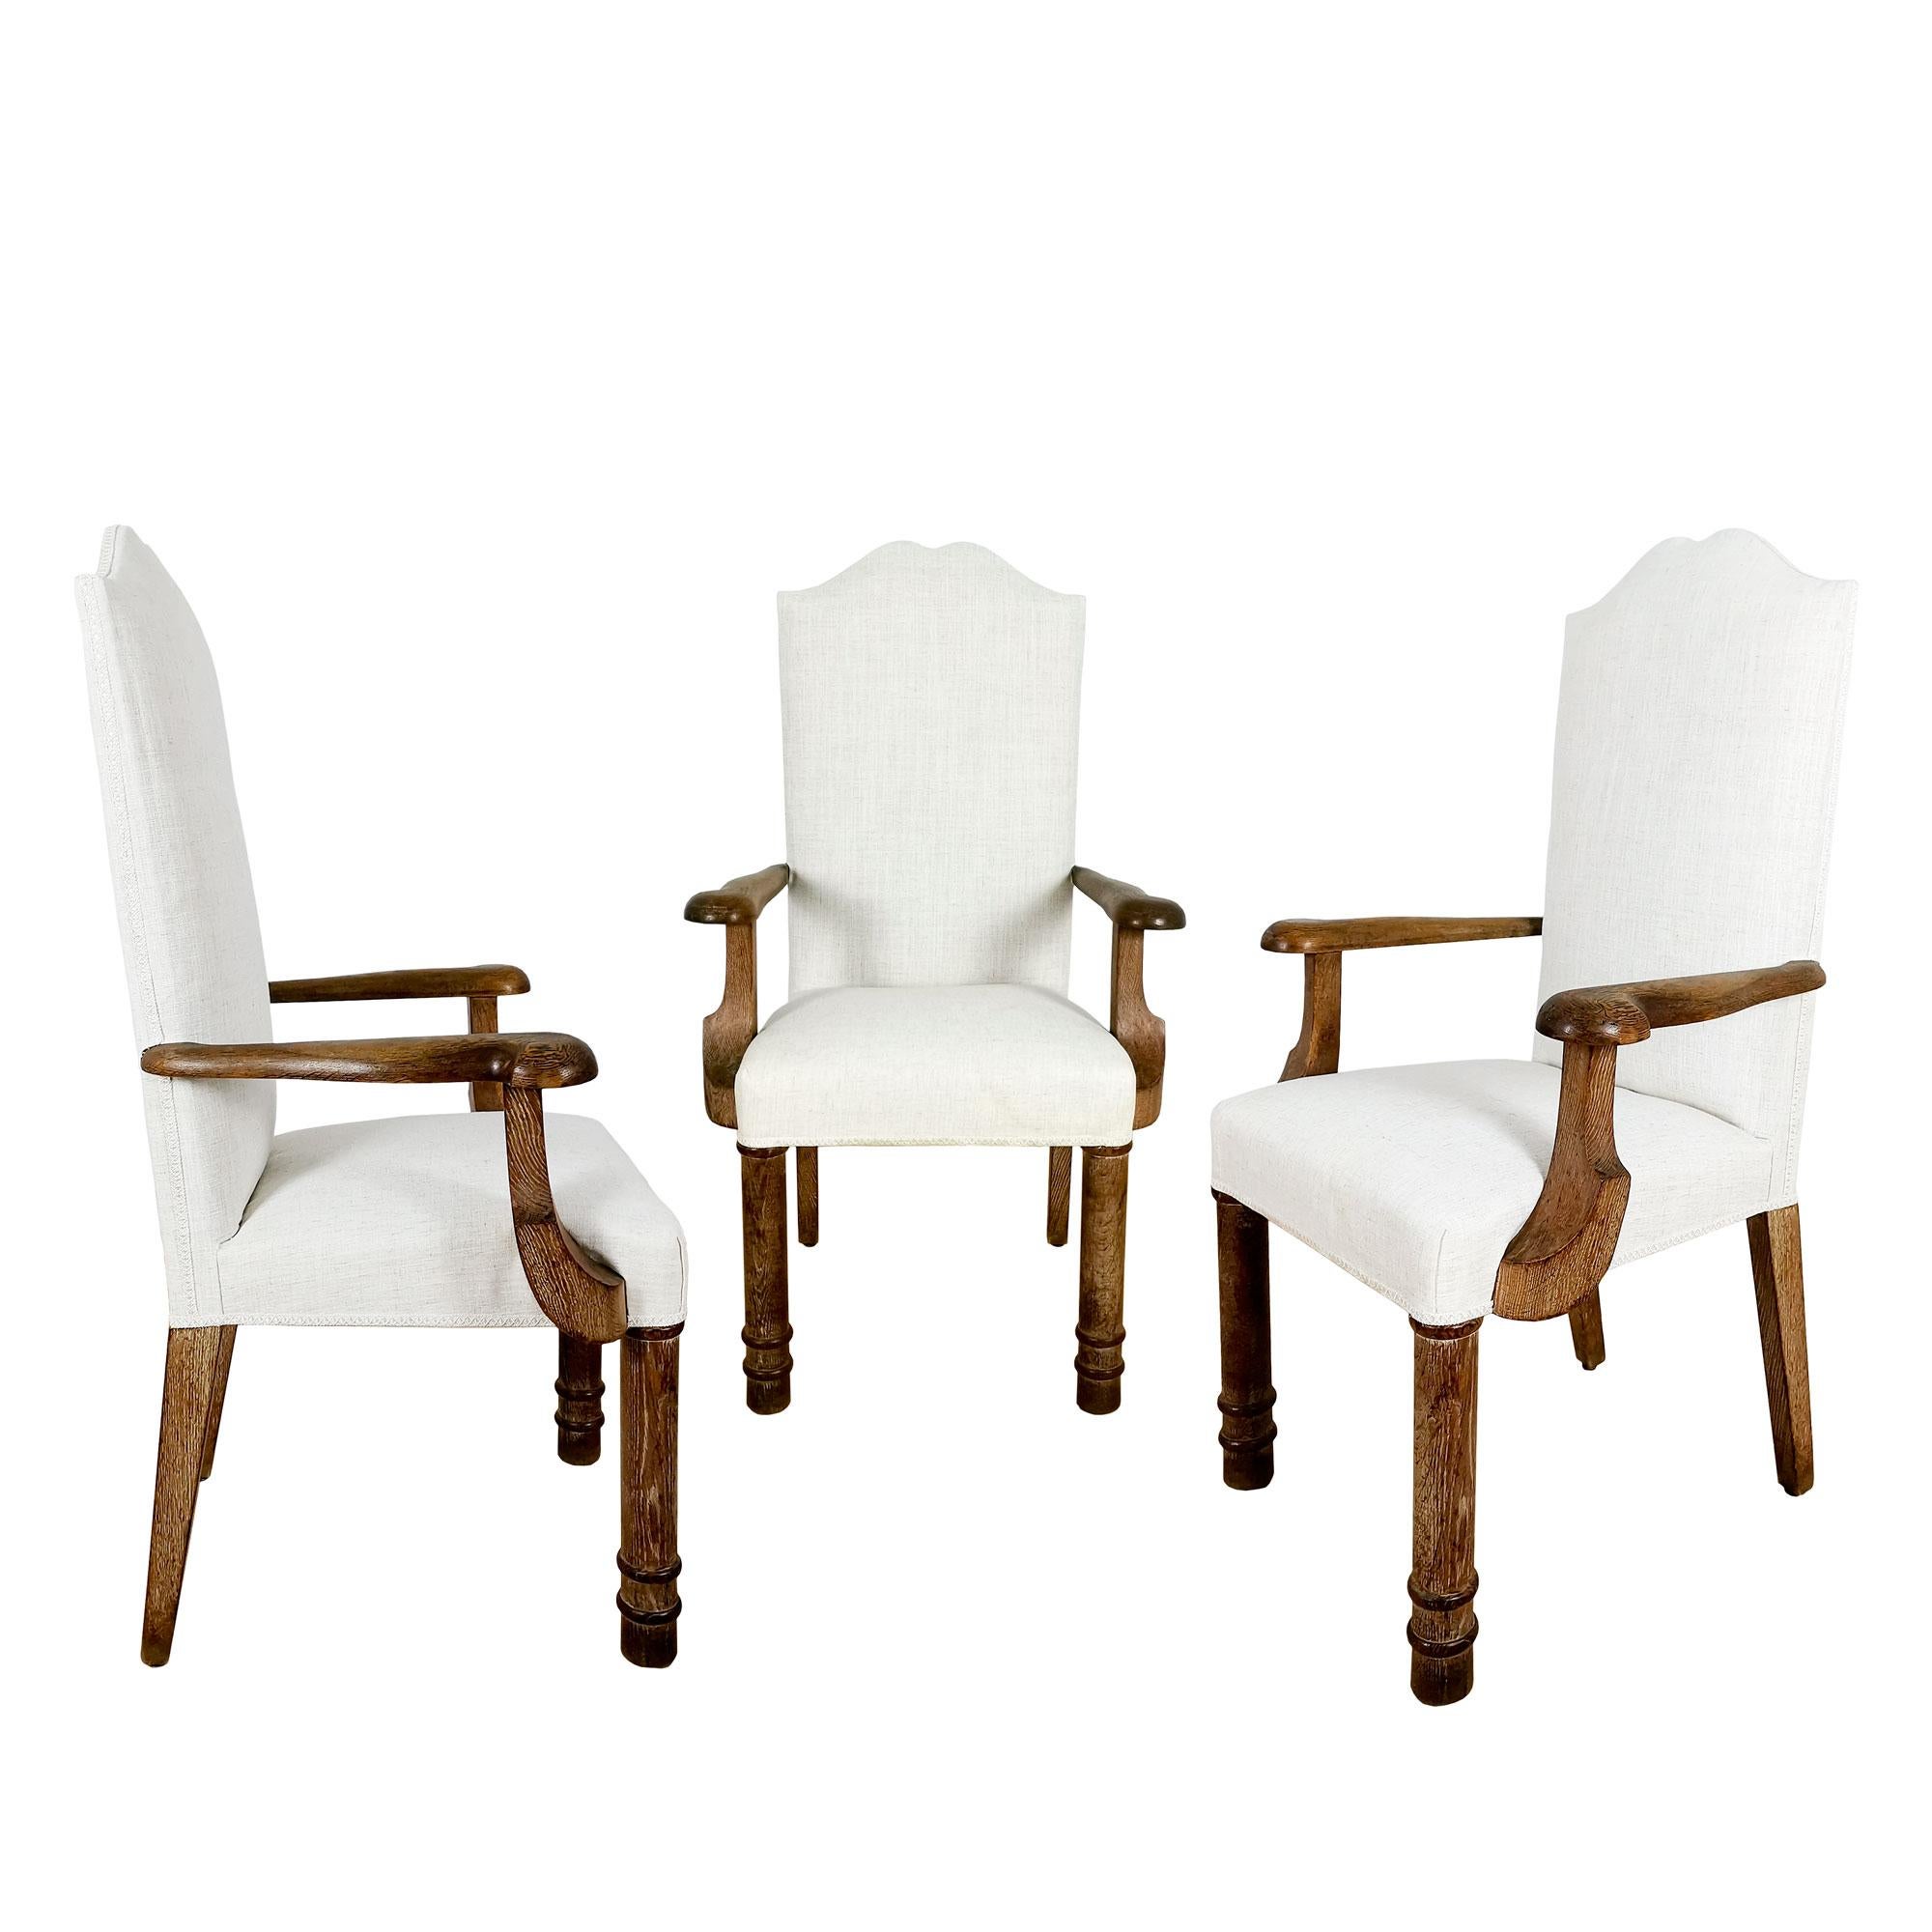 Set of 7 dining room armchairs in solid oak with ceruse patina, reupholstered in ecru linen fabric.

In the style of Jacques Adnet.

France c. 1940